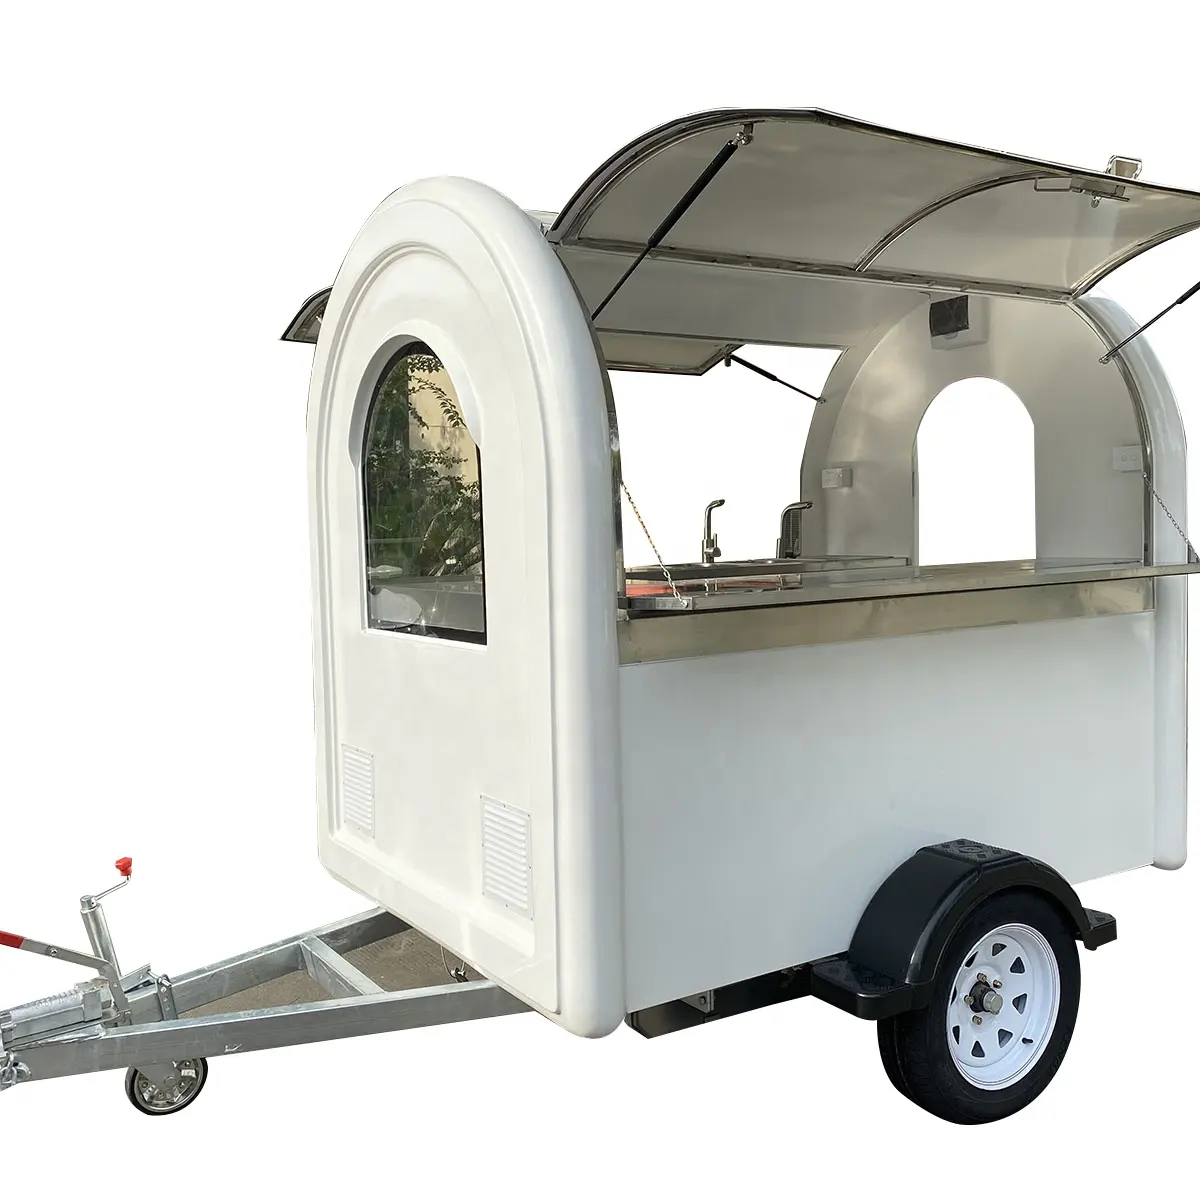 Oucci Chinese Concession Trailer Hot Bbq Food Mobile Carts And Food Truck Trailers Snack Food